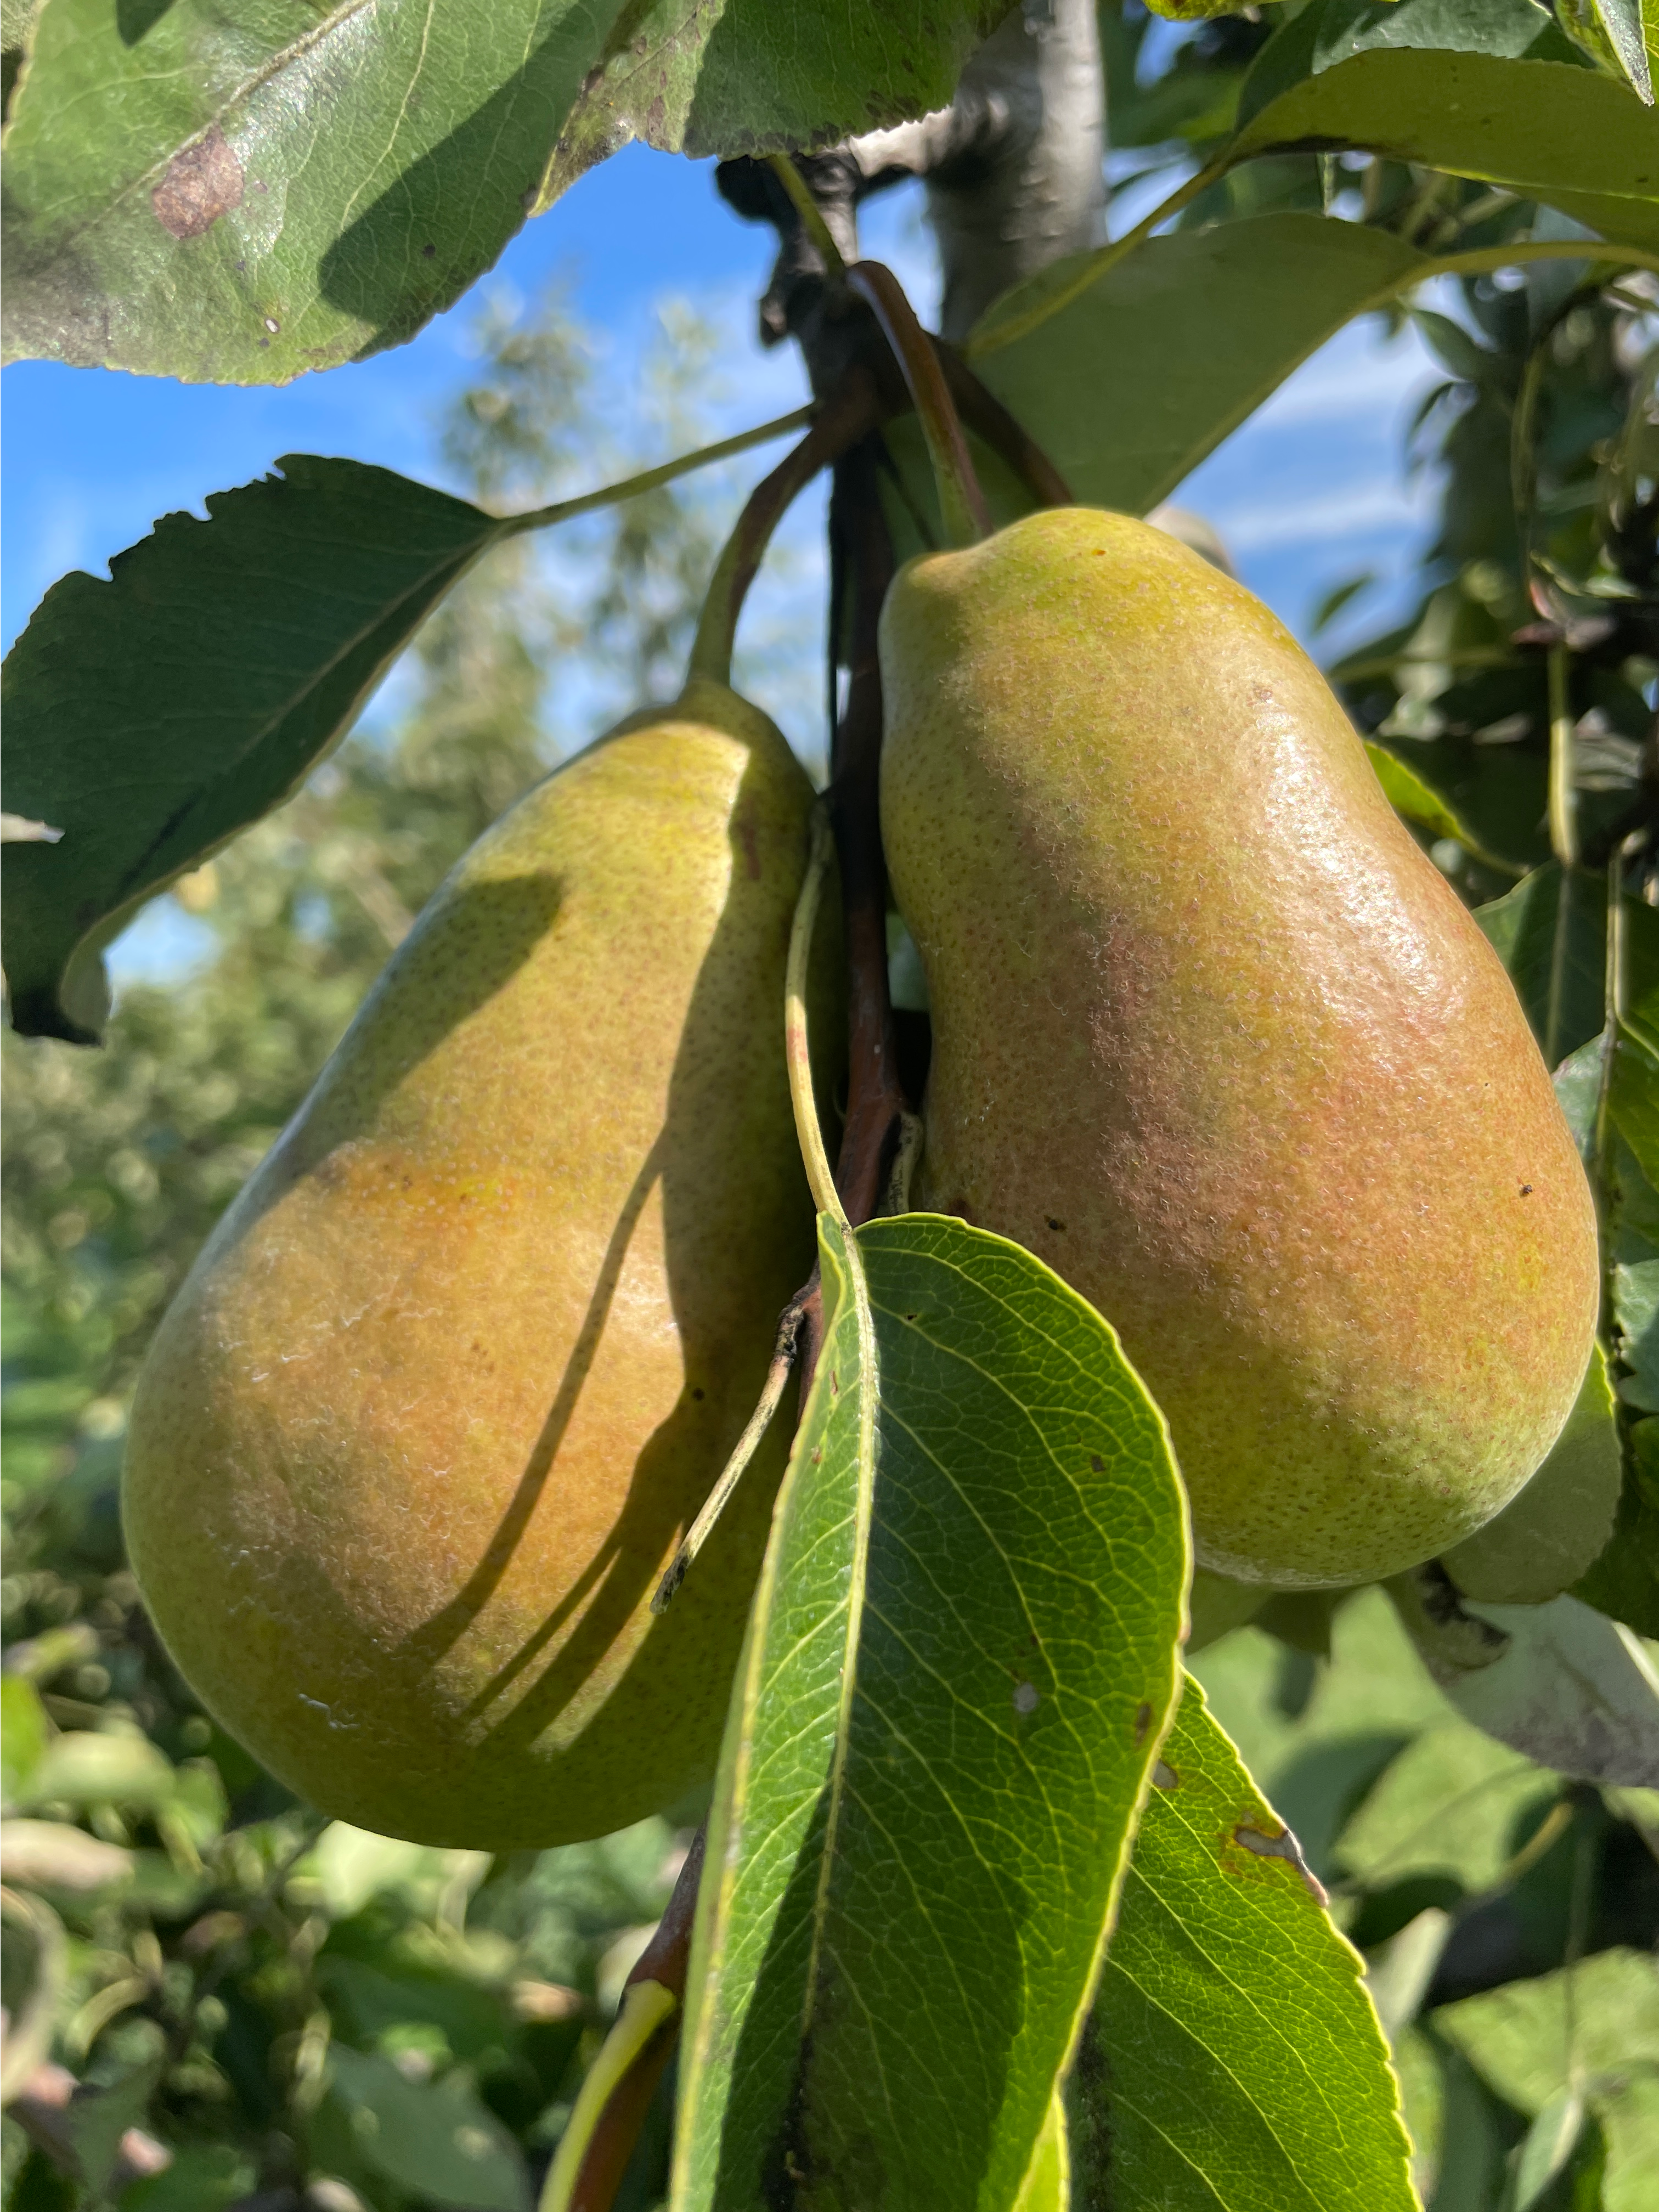 Harrow Sweet pears almost ready for harvest.